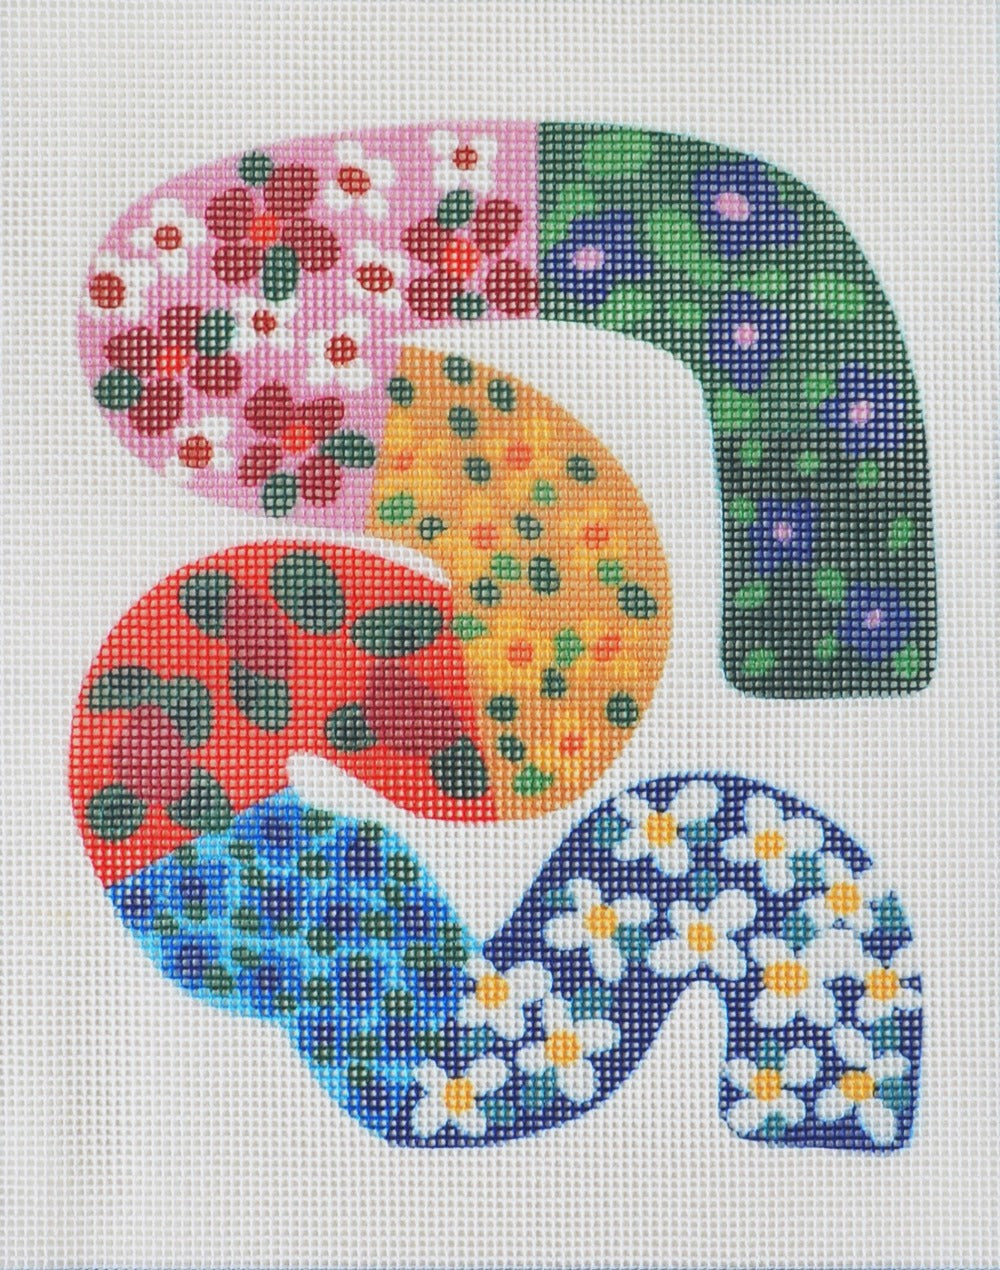 Sunflower abstract and floral design for a needlepoint kit by Unwind Studio in collaboration with artist Melanie Macilwain